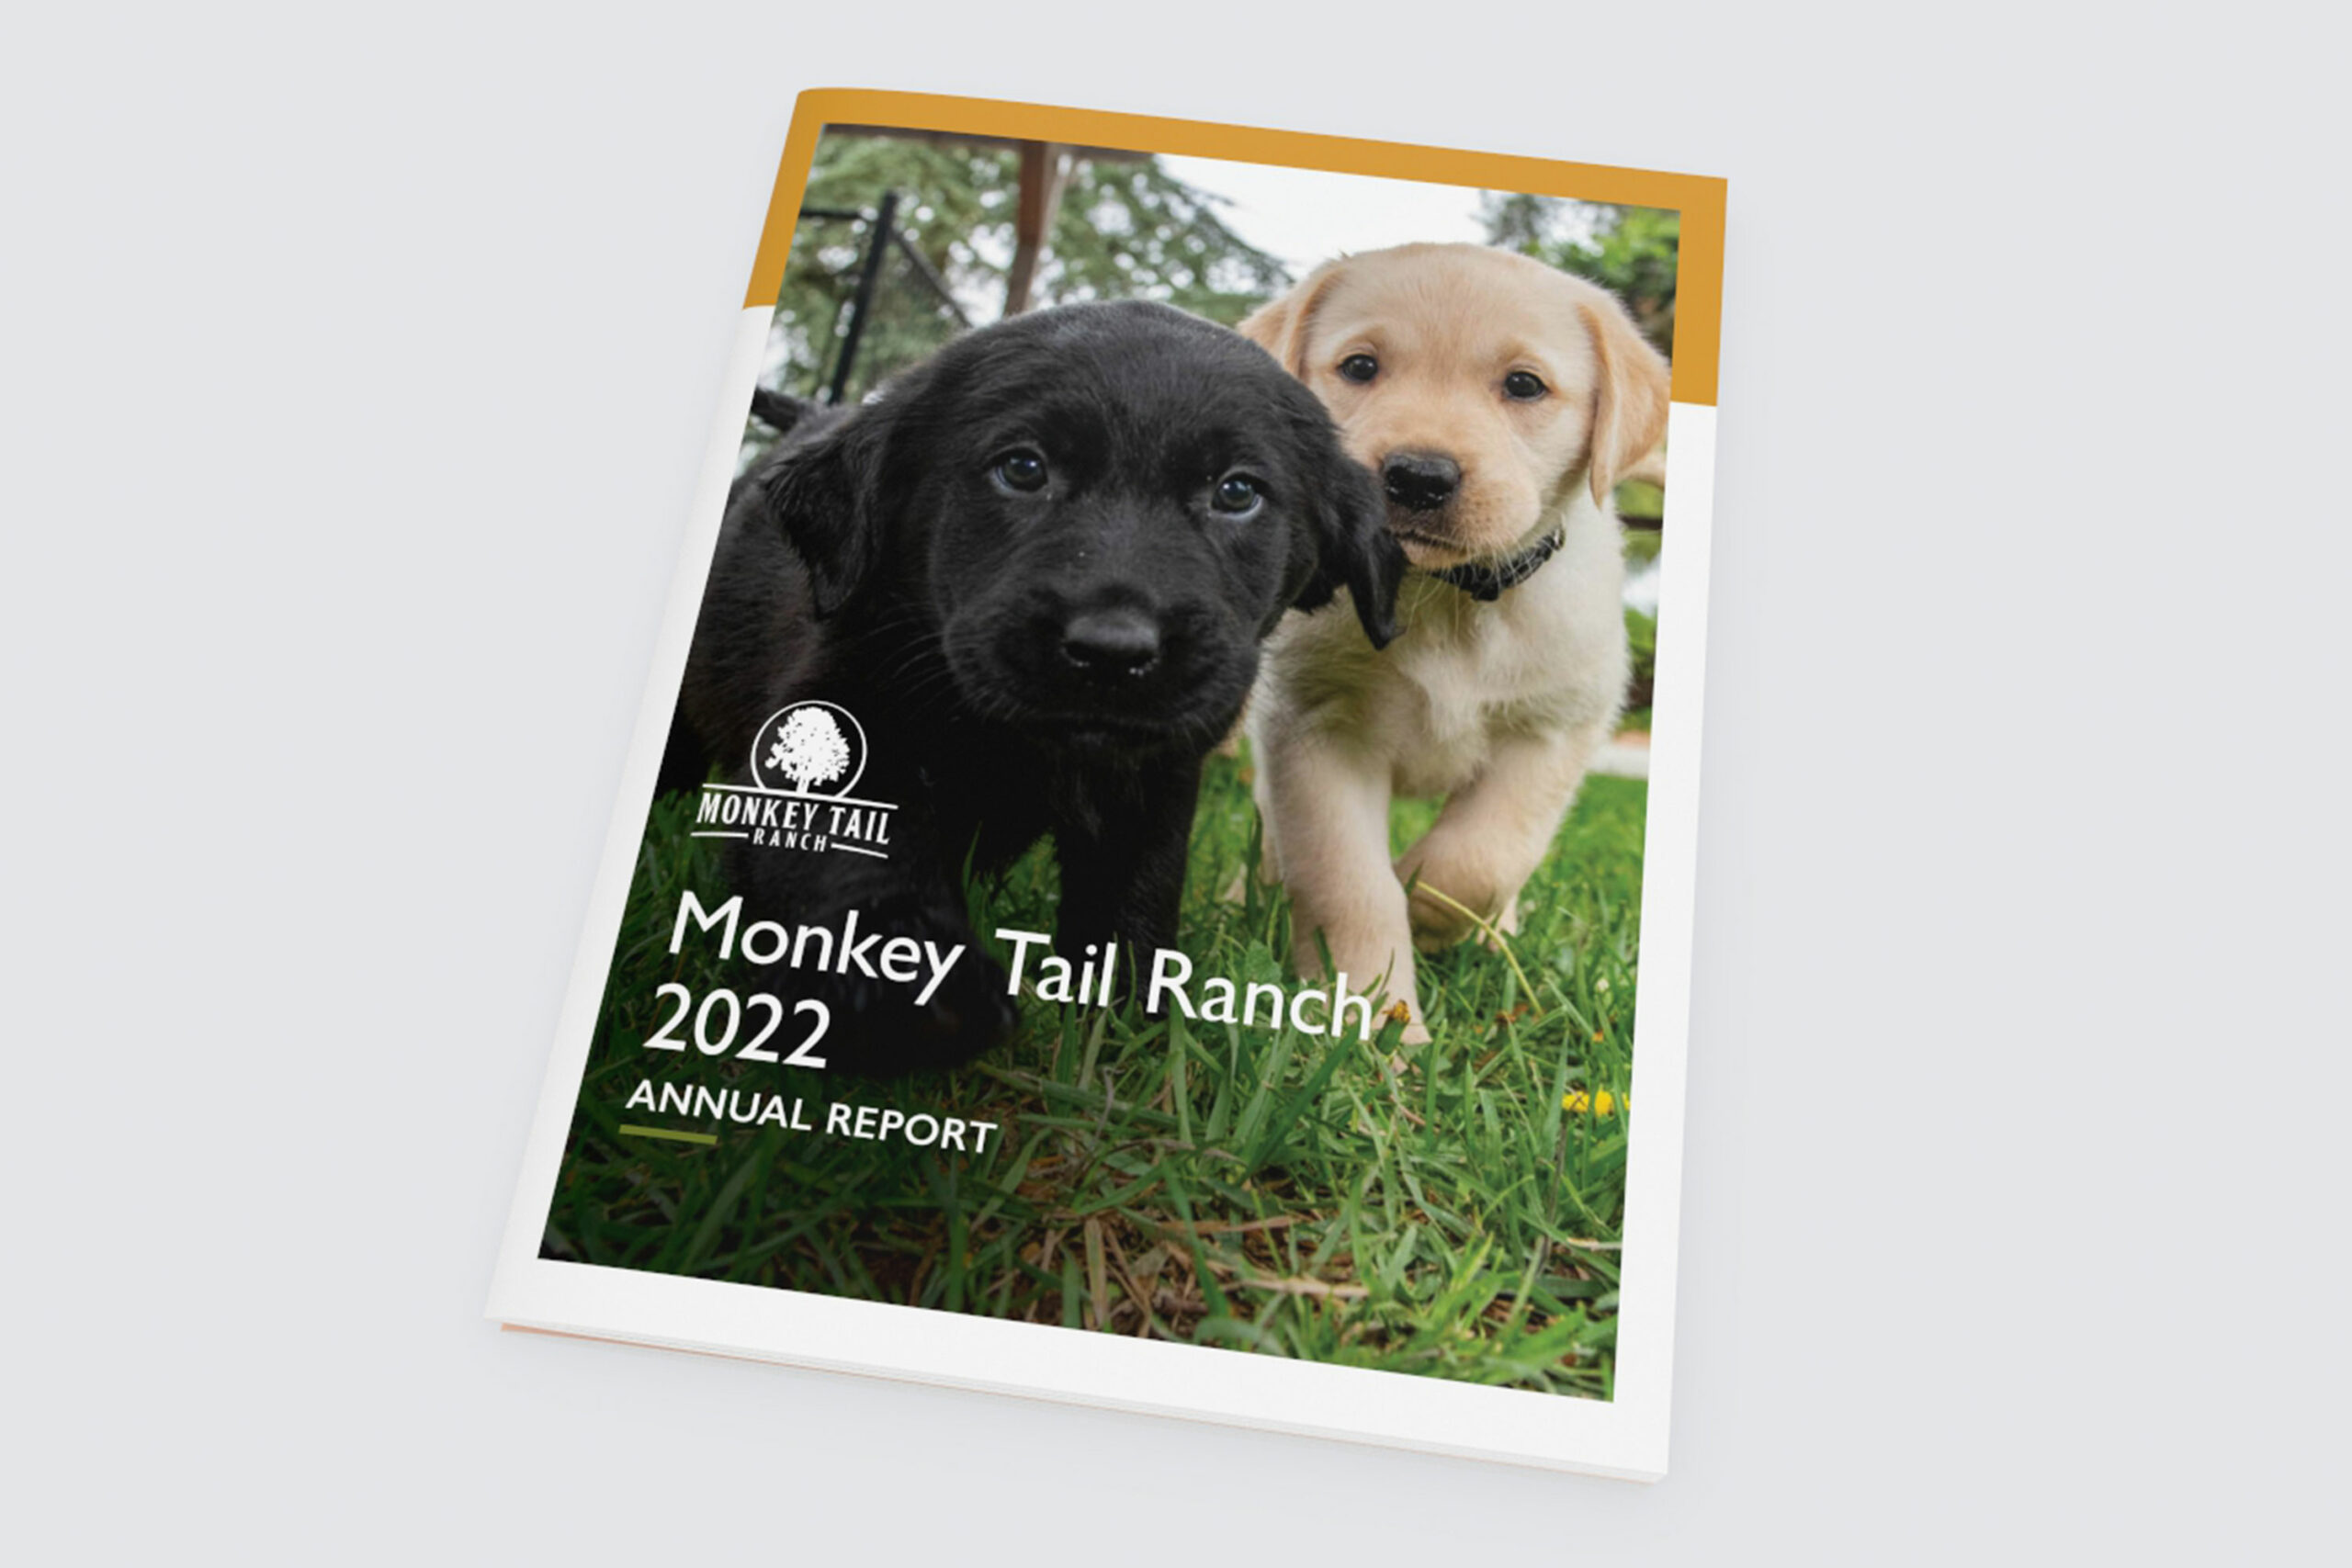 Monkey Tail Ranch 2022 Annual Report